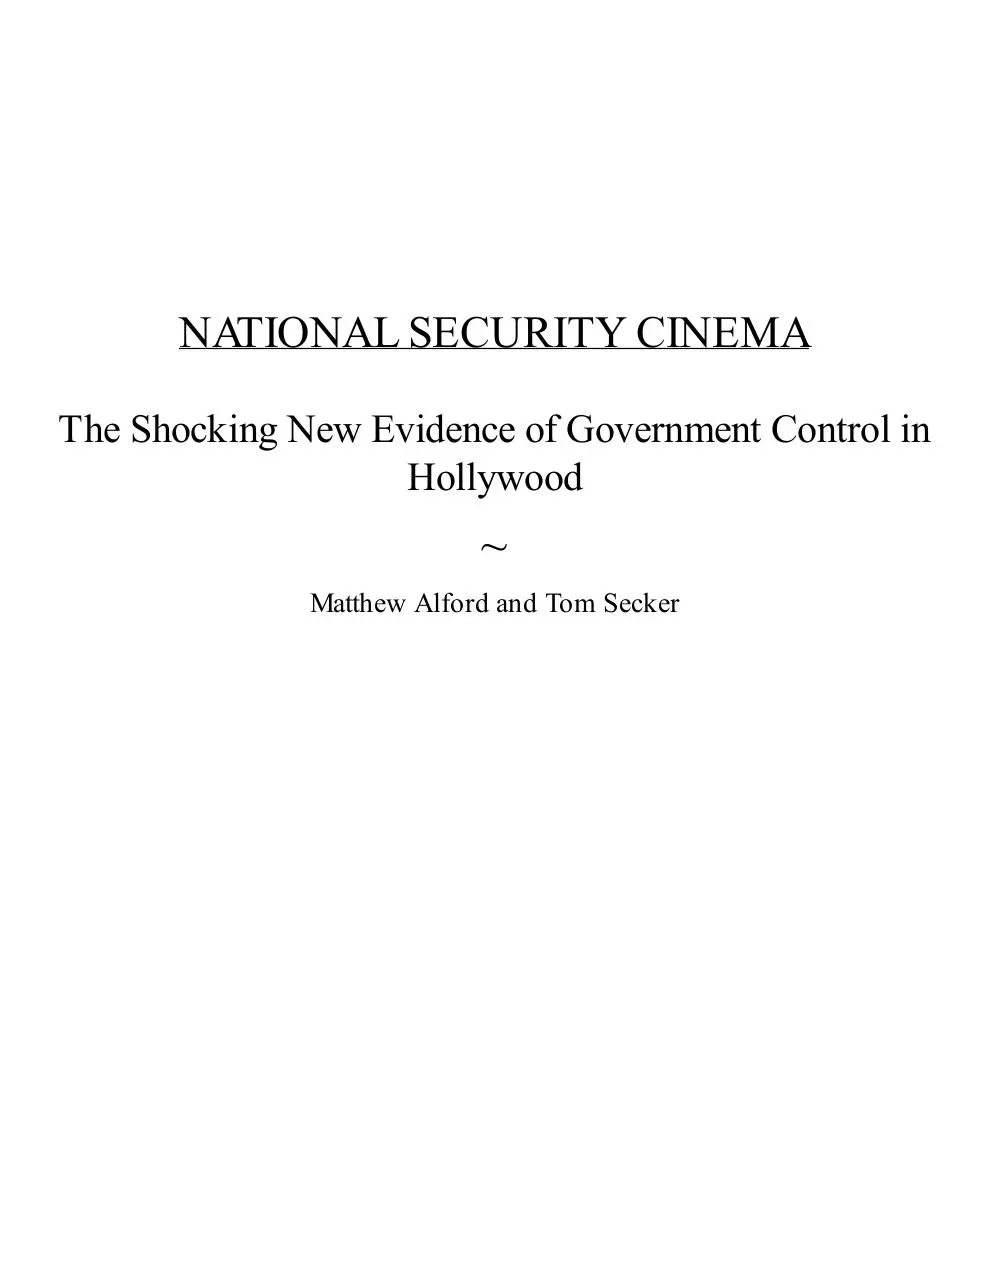 National Security Cinema: The Shocking New Evidence of Government Control  in Hollywood by Matthew Alford & Tom Secker - Matthew Alford - National  Security Cinema pdf - PDF Archive